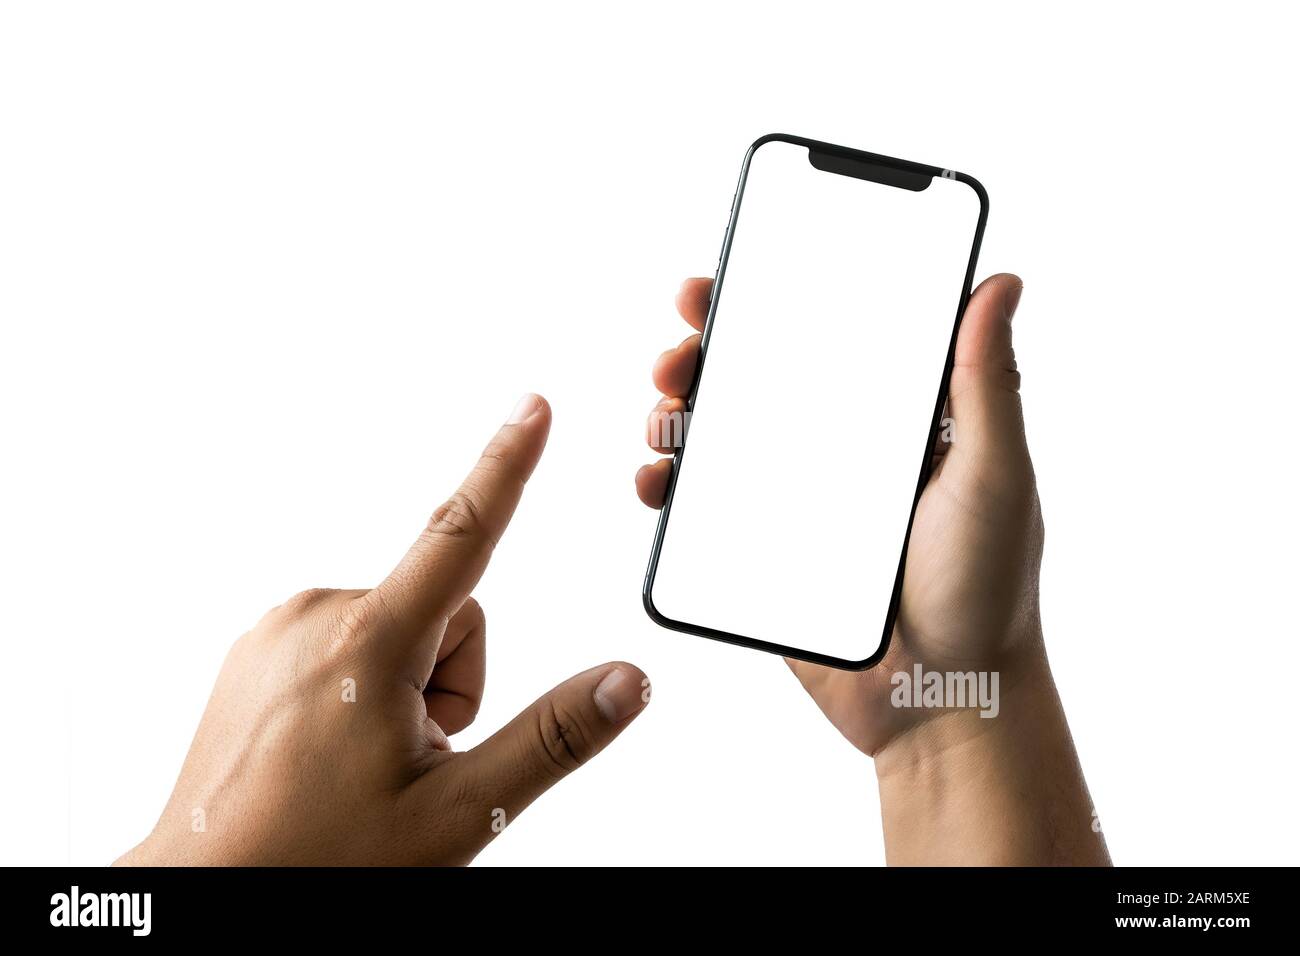 Iphone10 Cut Out Stock Images & Pictures - Alamy